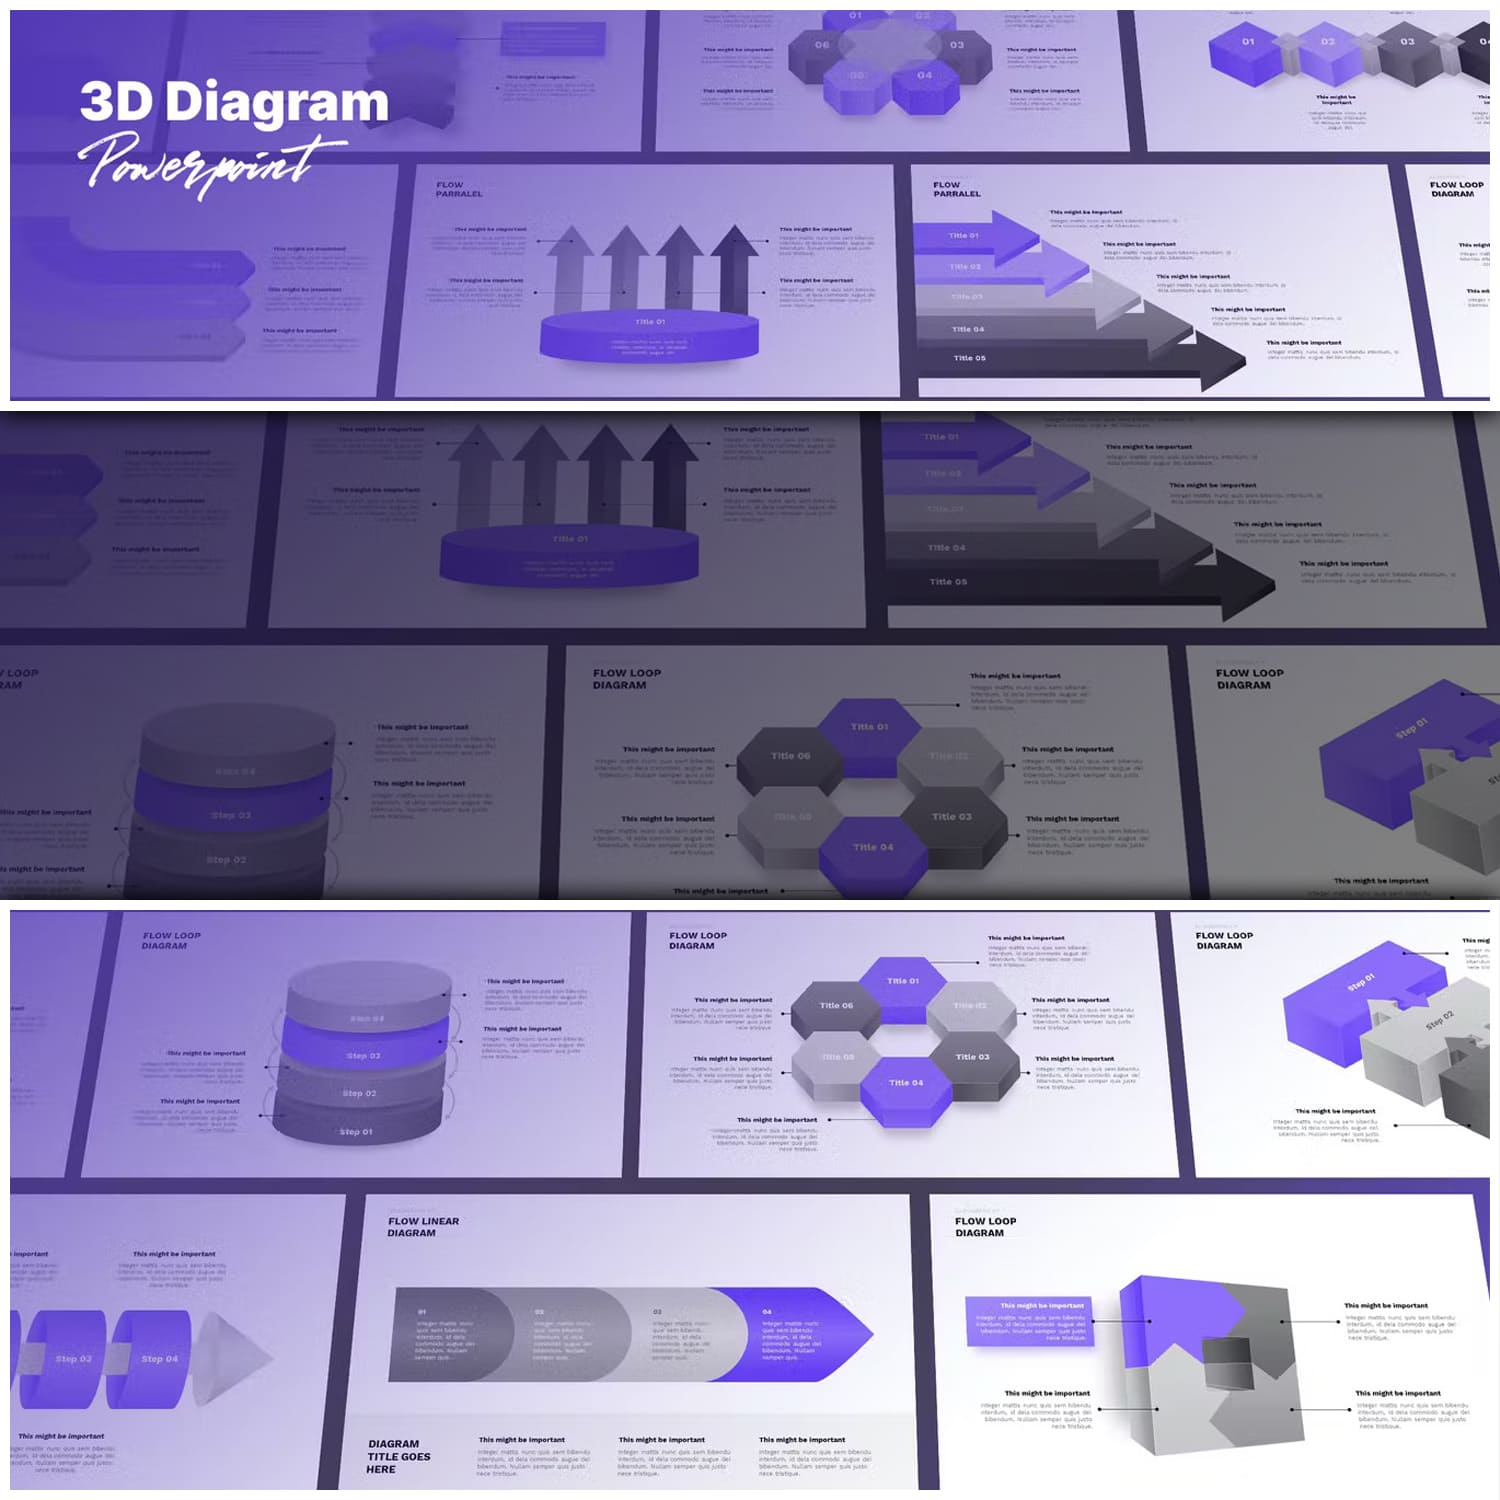 3d diagram powerpoint template from Slidehack.